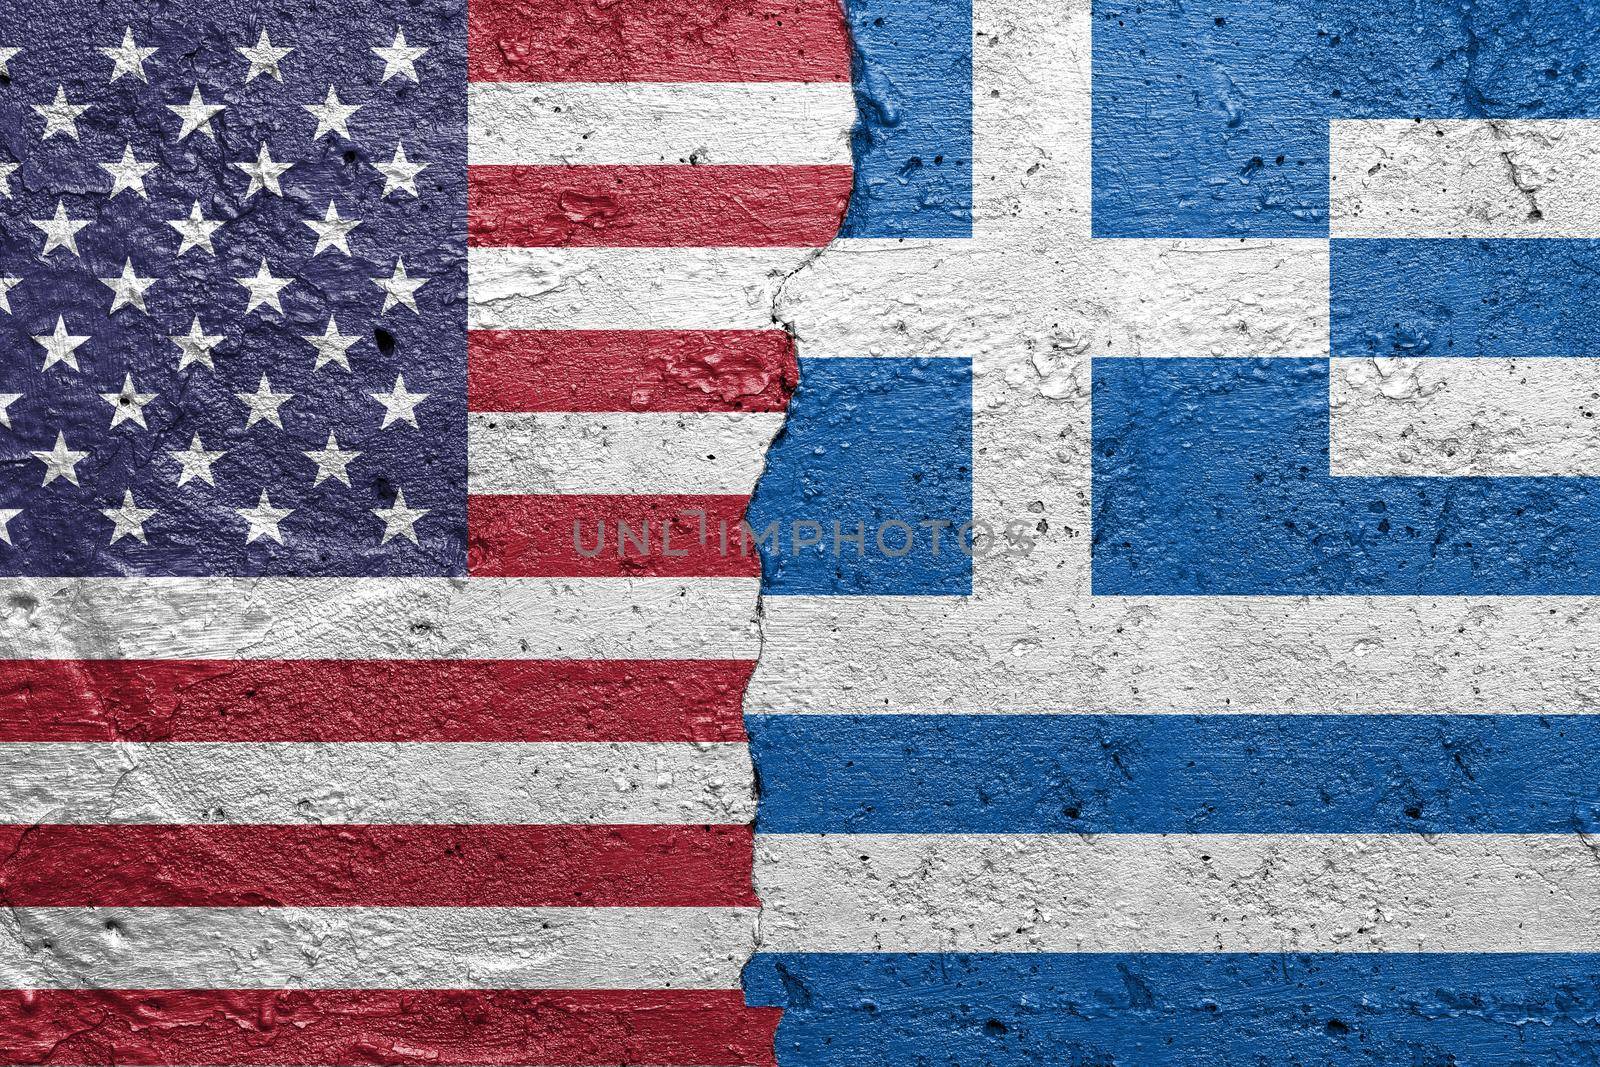 United States of America and Greece - Cracked concrete wall painted with a USA flag on the left and a Greek flag on the right